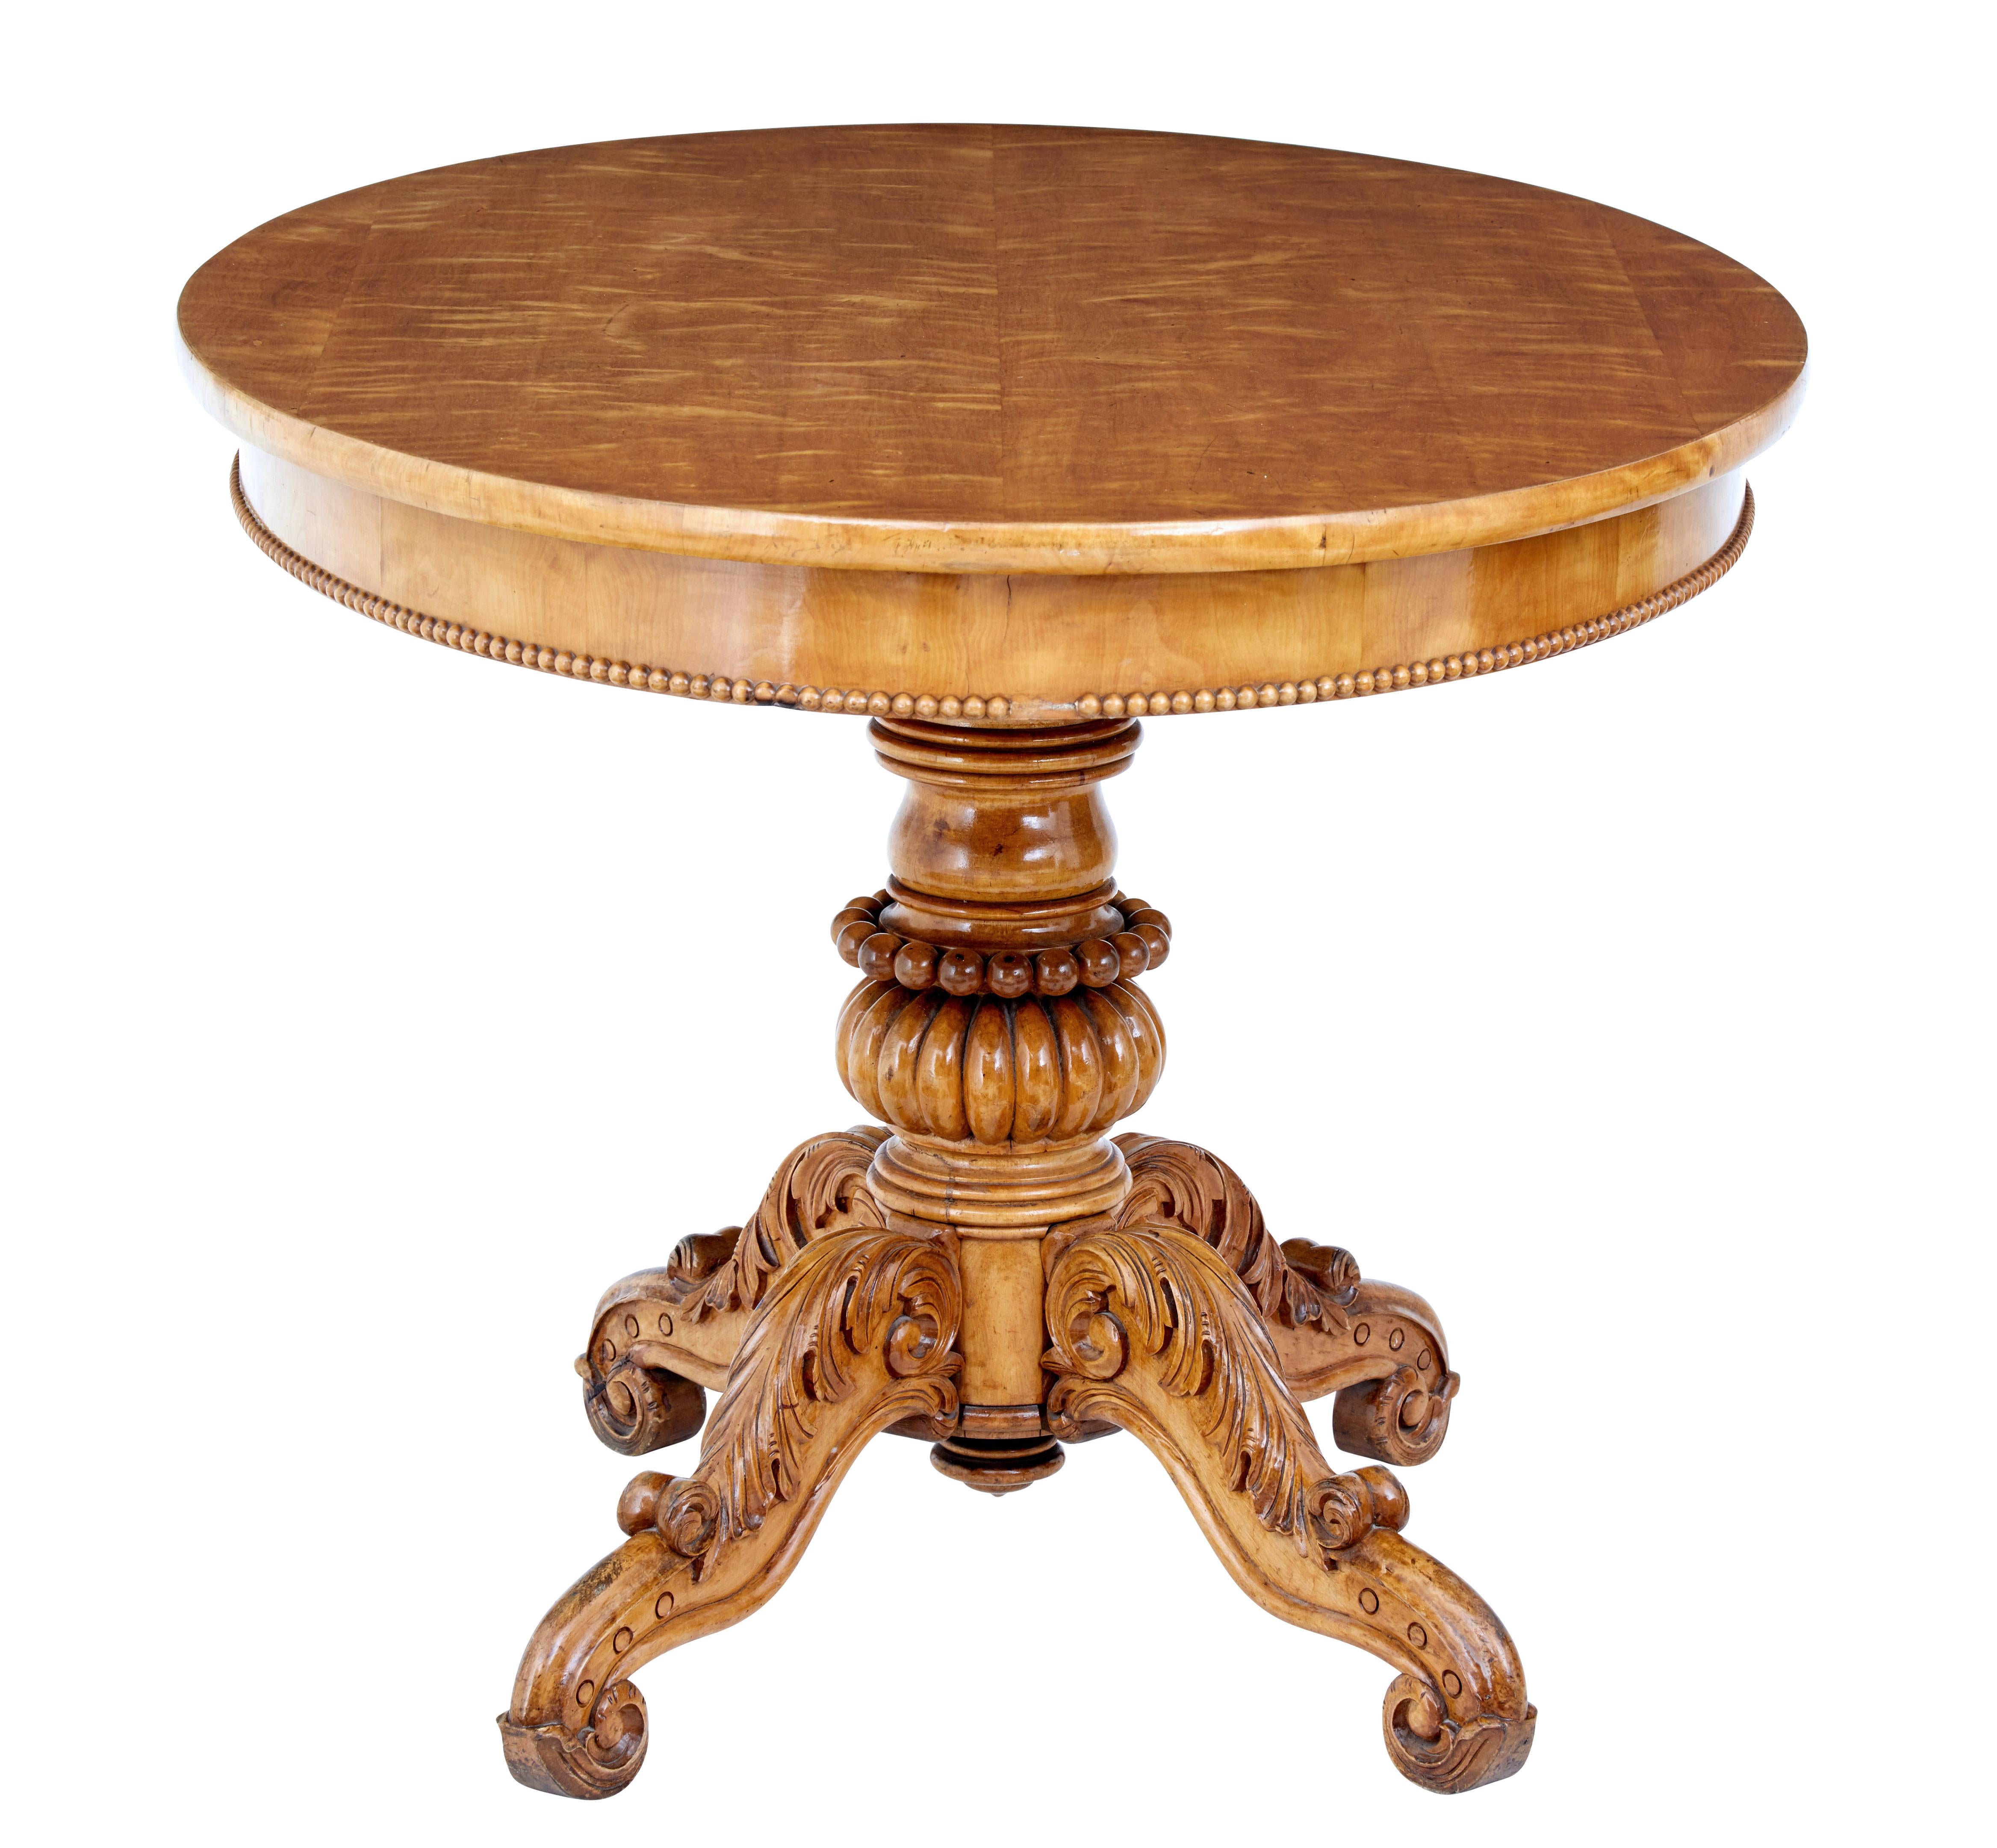 Decorative Swedish center table of good proportions, circa 1870.

Simple large oval top with beaded edge to the frieze. Standing on a turned and carved stem with 4 profusely carved scrolling legs.

Rich golden color.

Light scratches to top